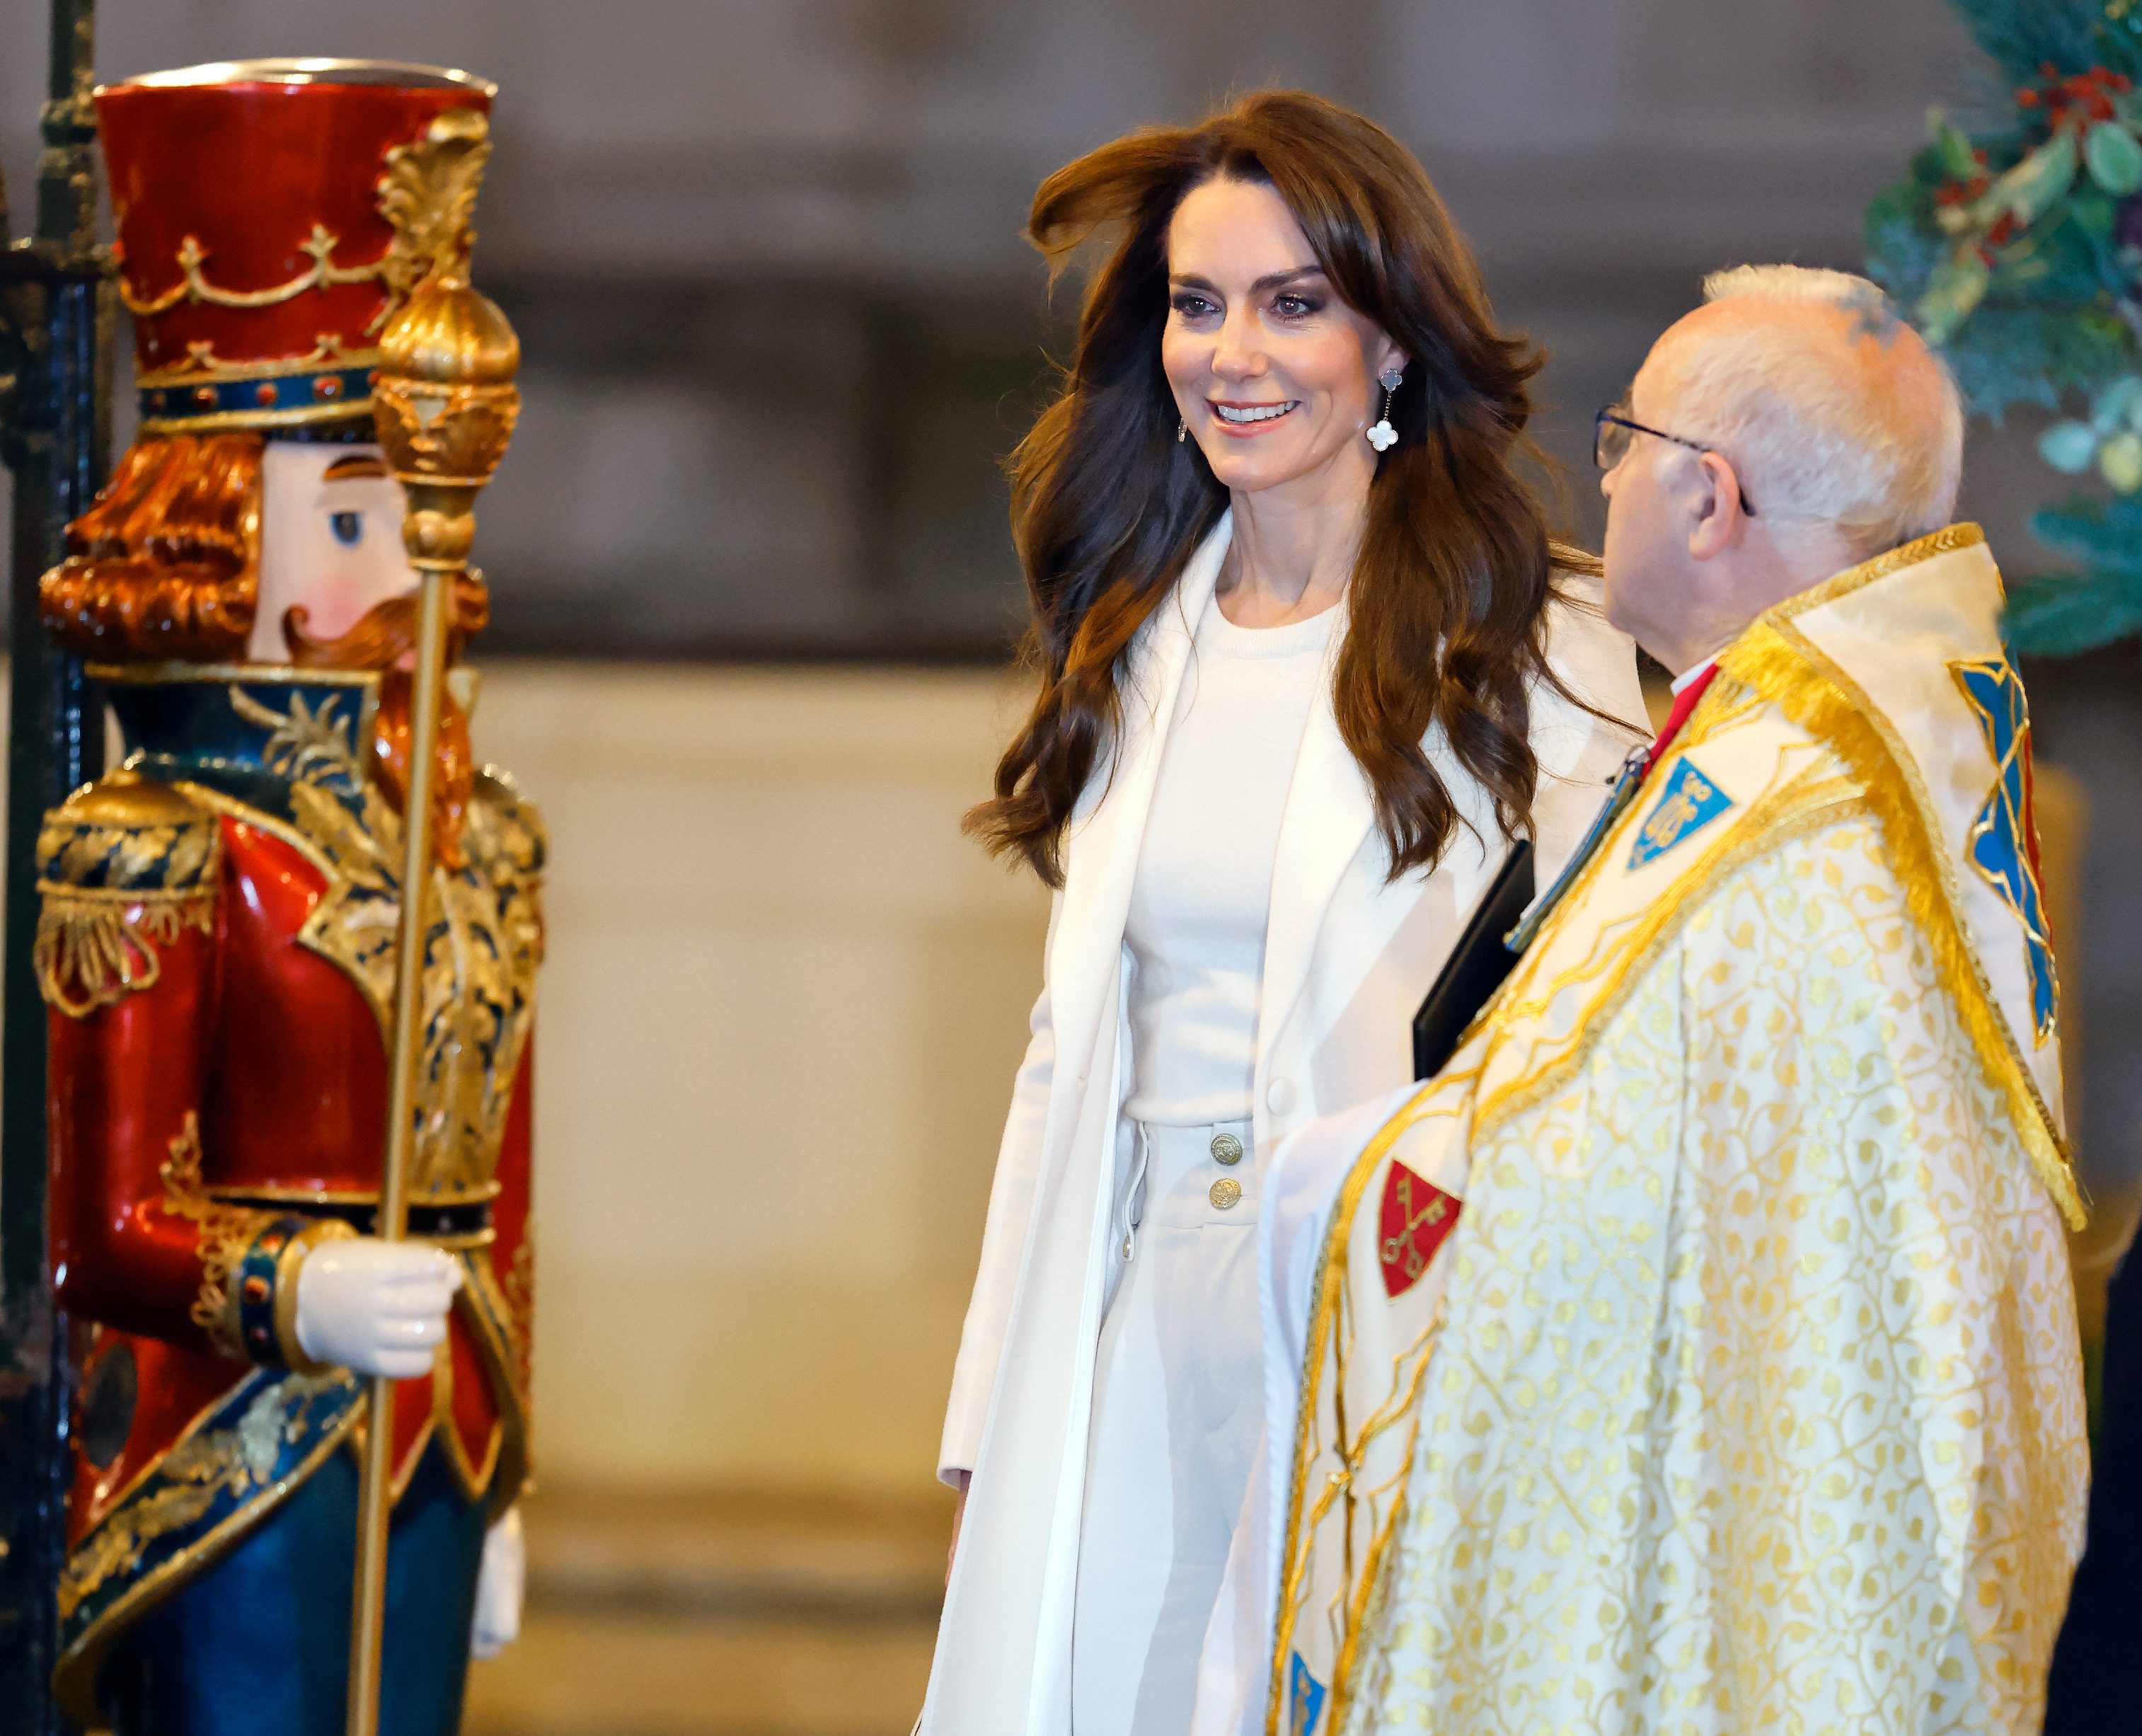 Kate Middleton in a white coat smiling, standing next to a man in ceremonial attire